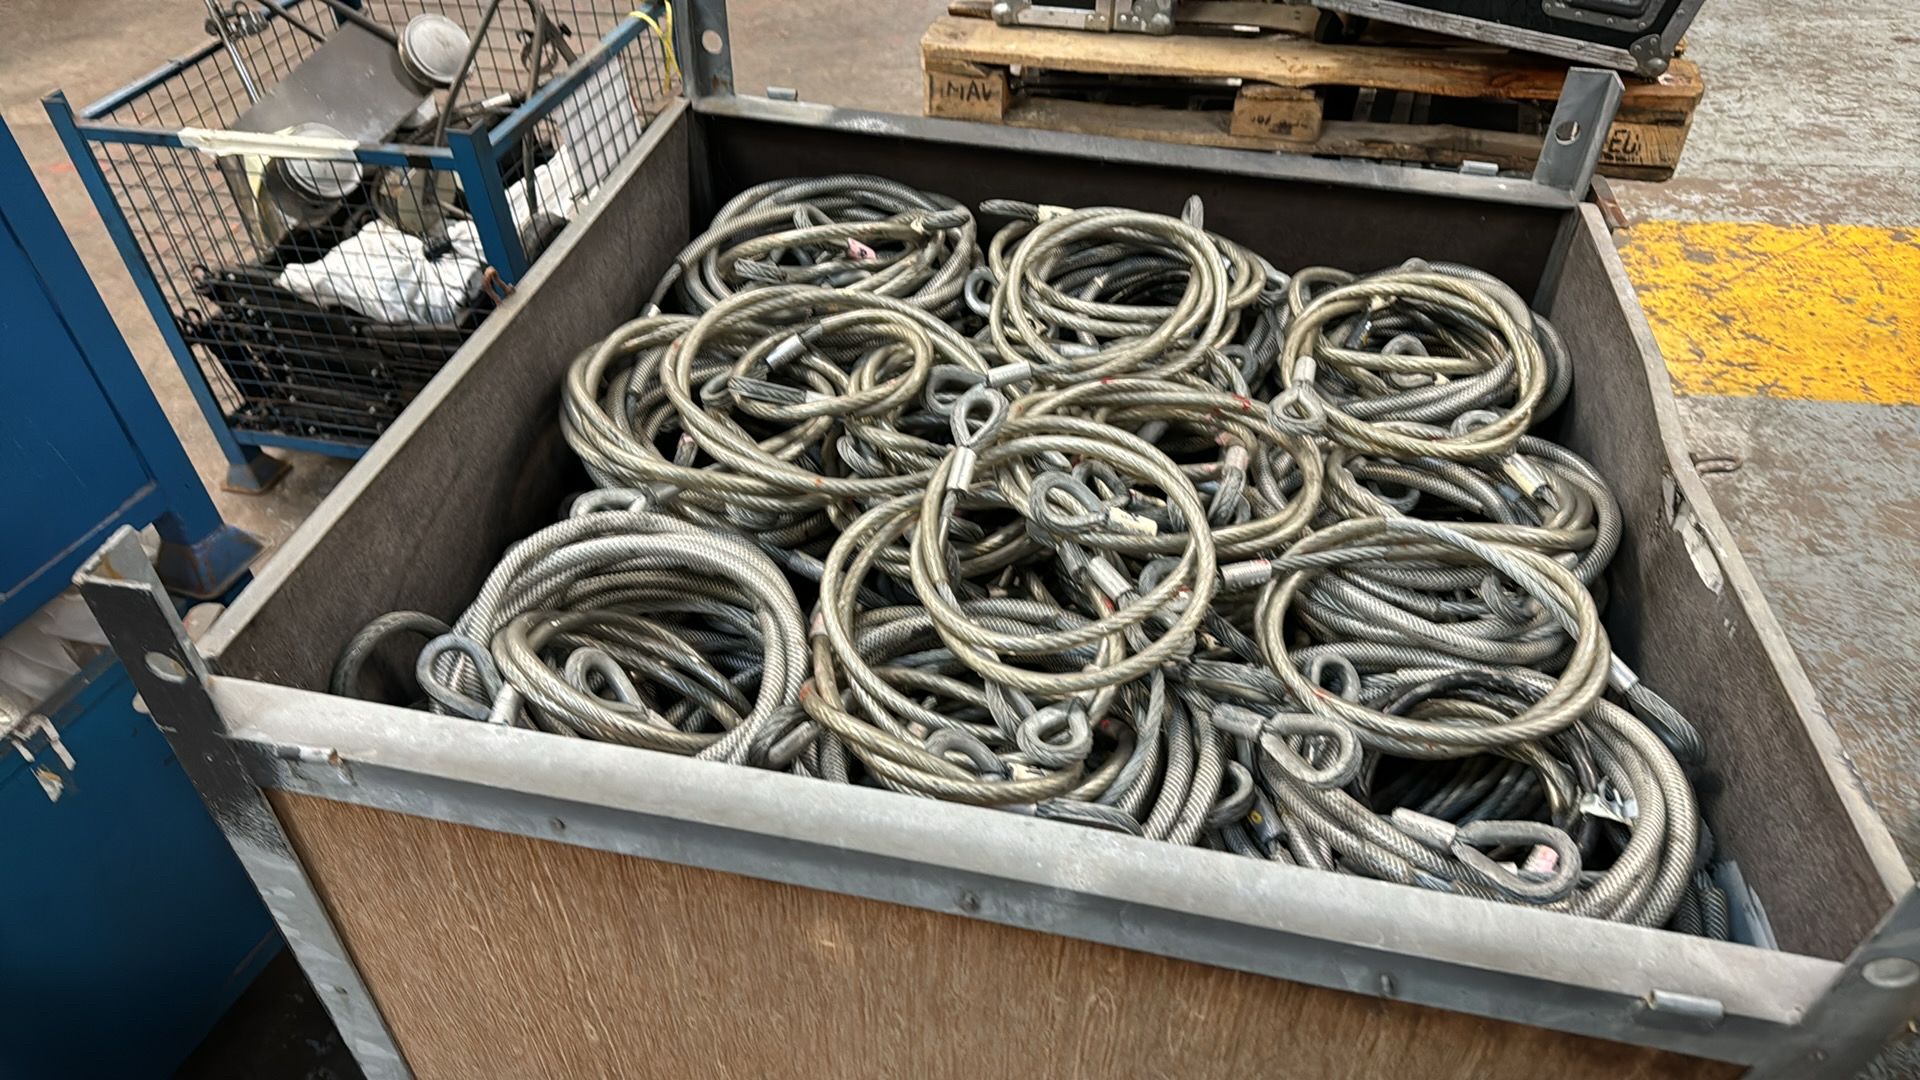 Crate, full of industrial rigging wire - Image 2 of 10